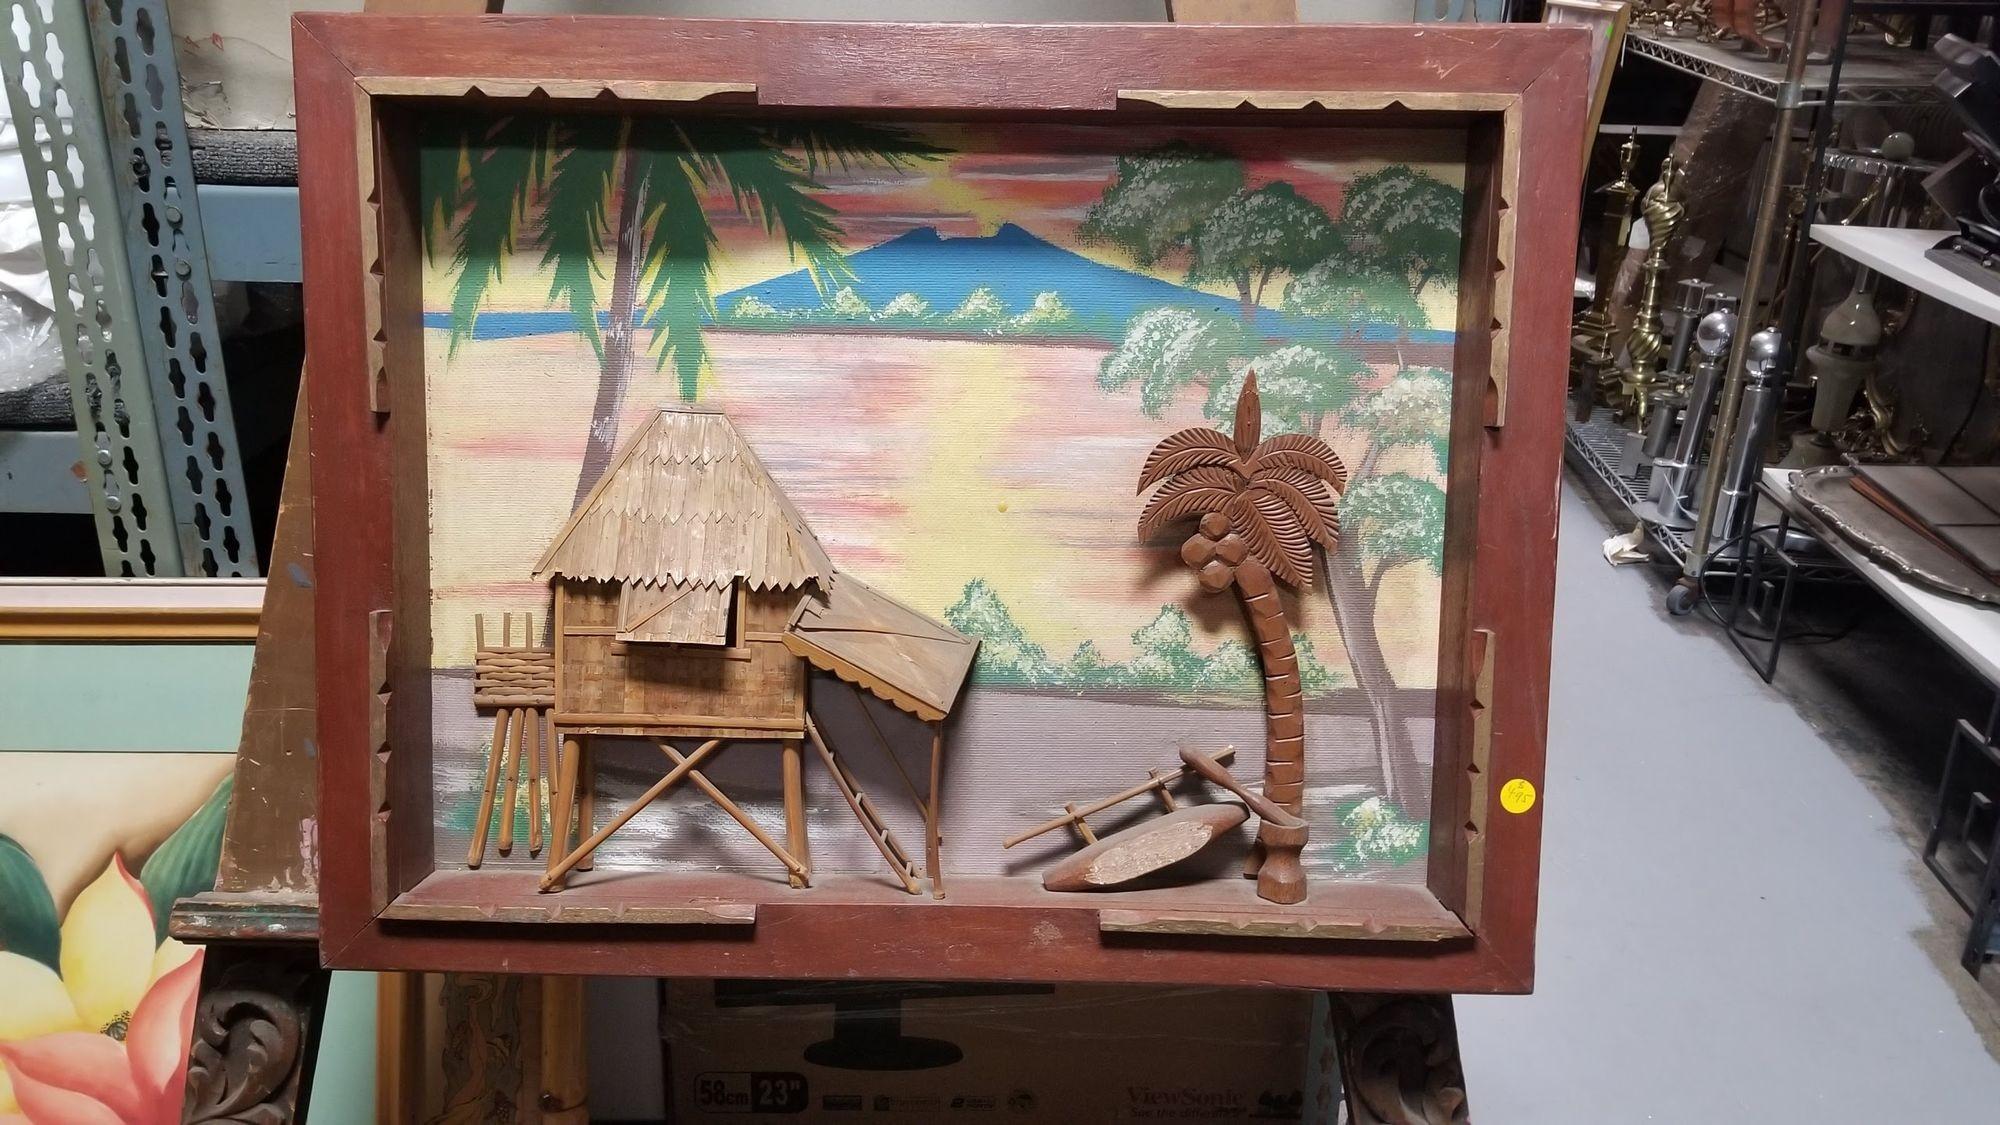 Unique mix media Mid-century 3D tropical beach scenic wall sculpture featuring a bamboo beach house made from bamboo and wicker in a koa wood frame with a hand-carved koa wood boat next to a palm tree carved in the same koa wood. This whole scene